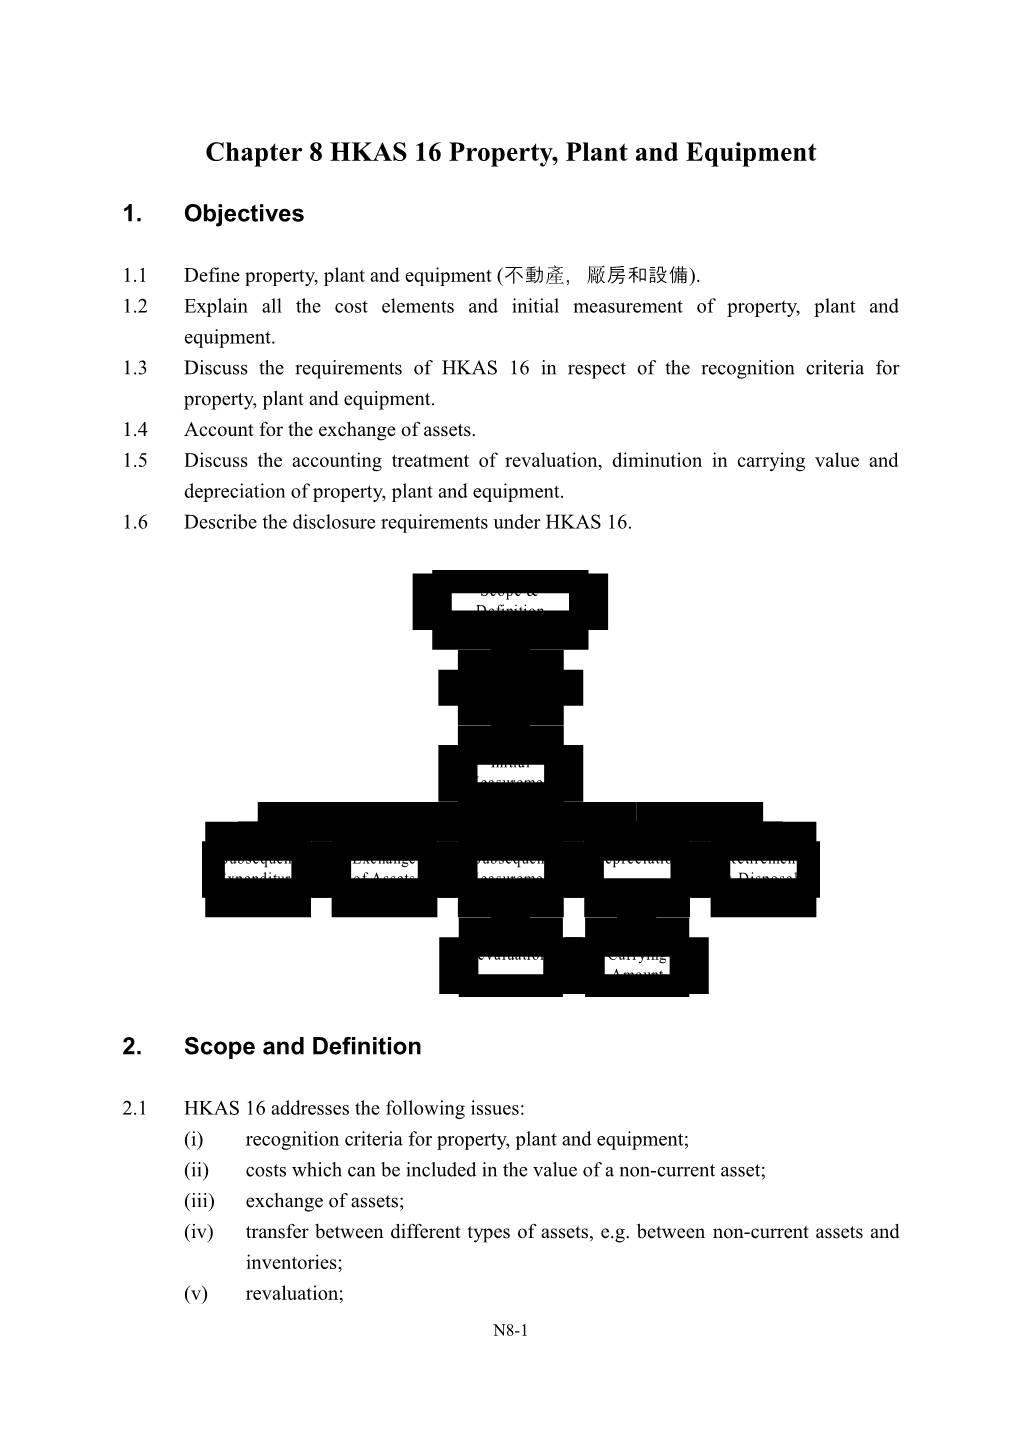 Chapter 10 HKSSAP 17 Property, Plant and Equipment